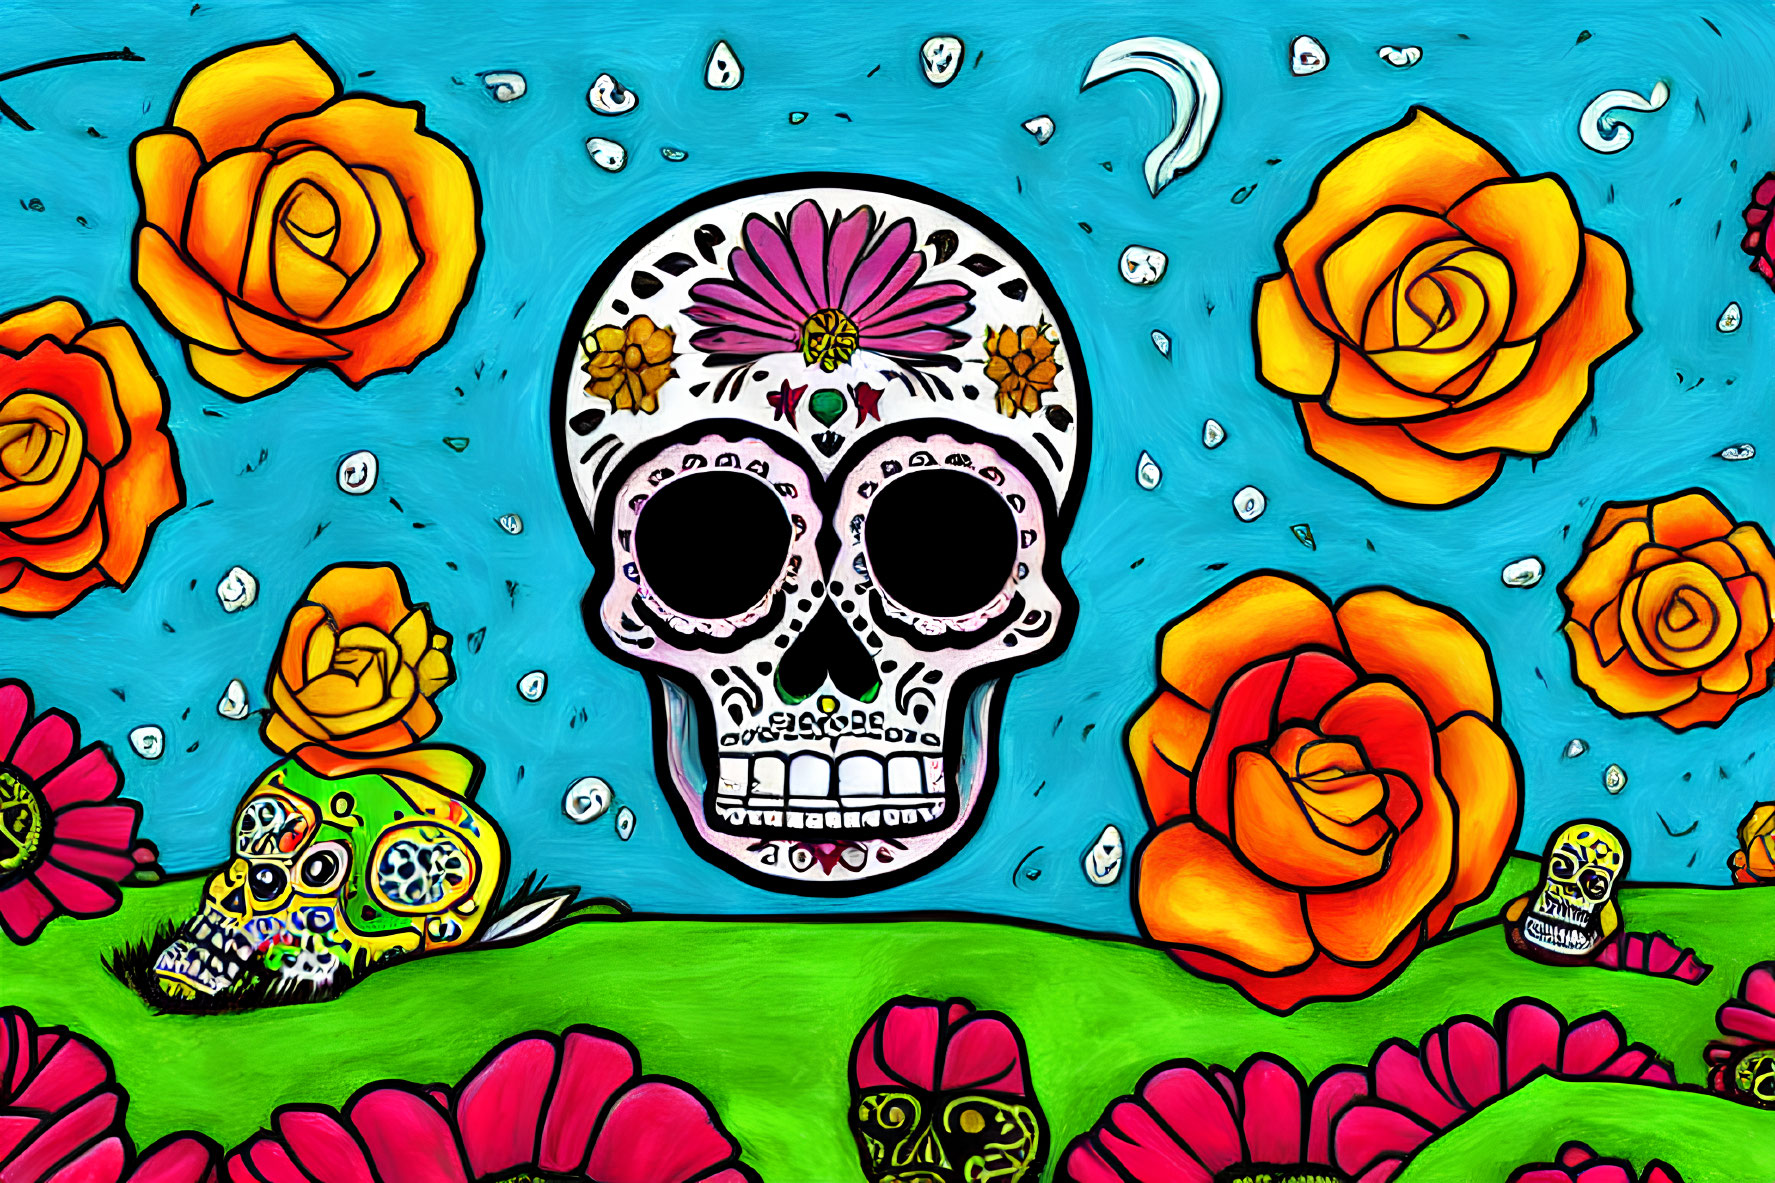 Colorful Day of the Dead Artwork with Skulls and Flowers on Blue Background